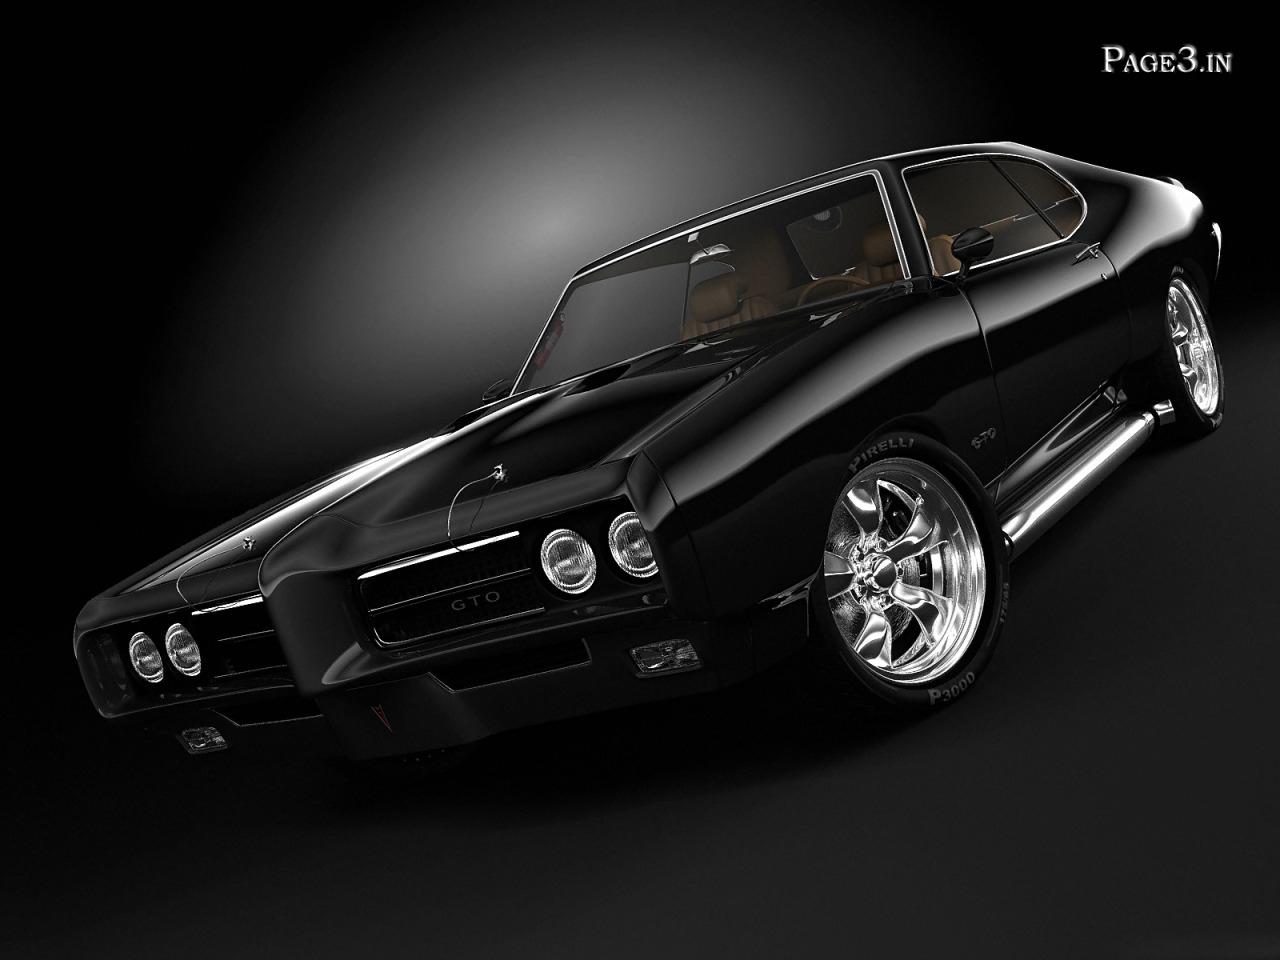 New Car Photo cool muscle cars wallpaper